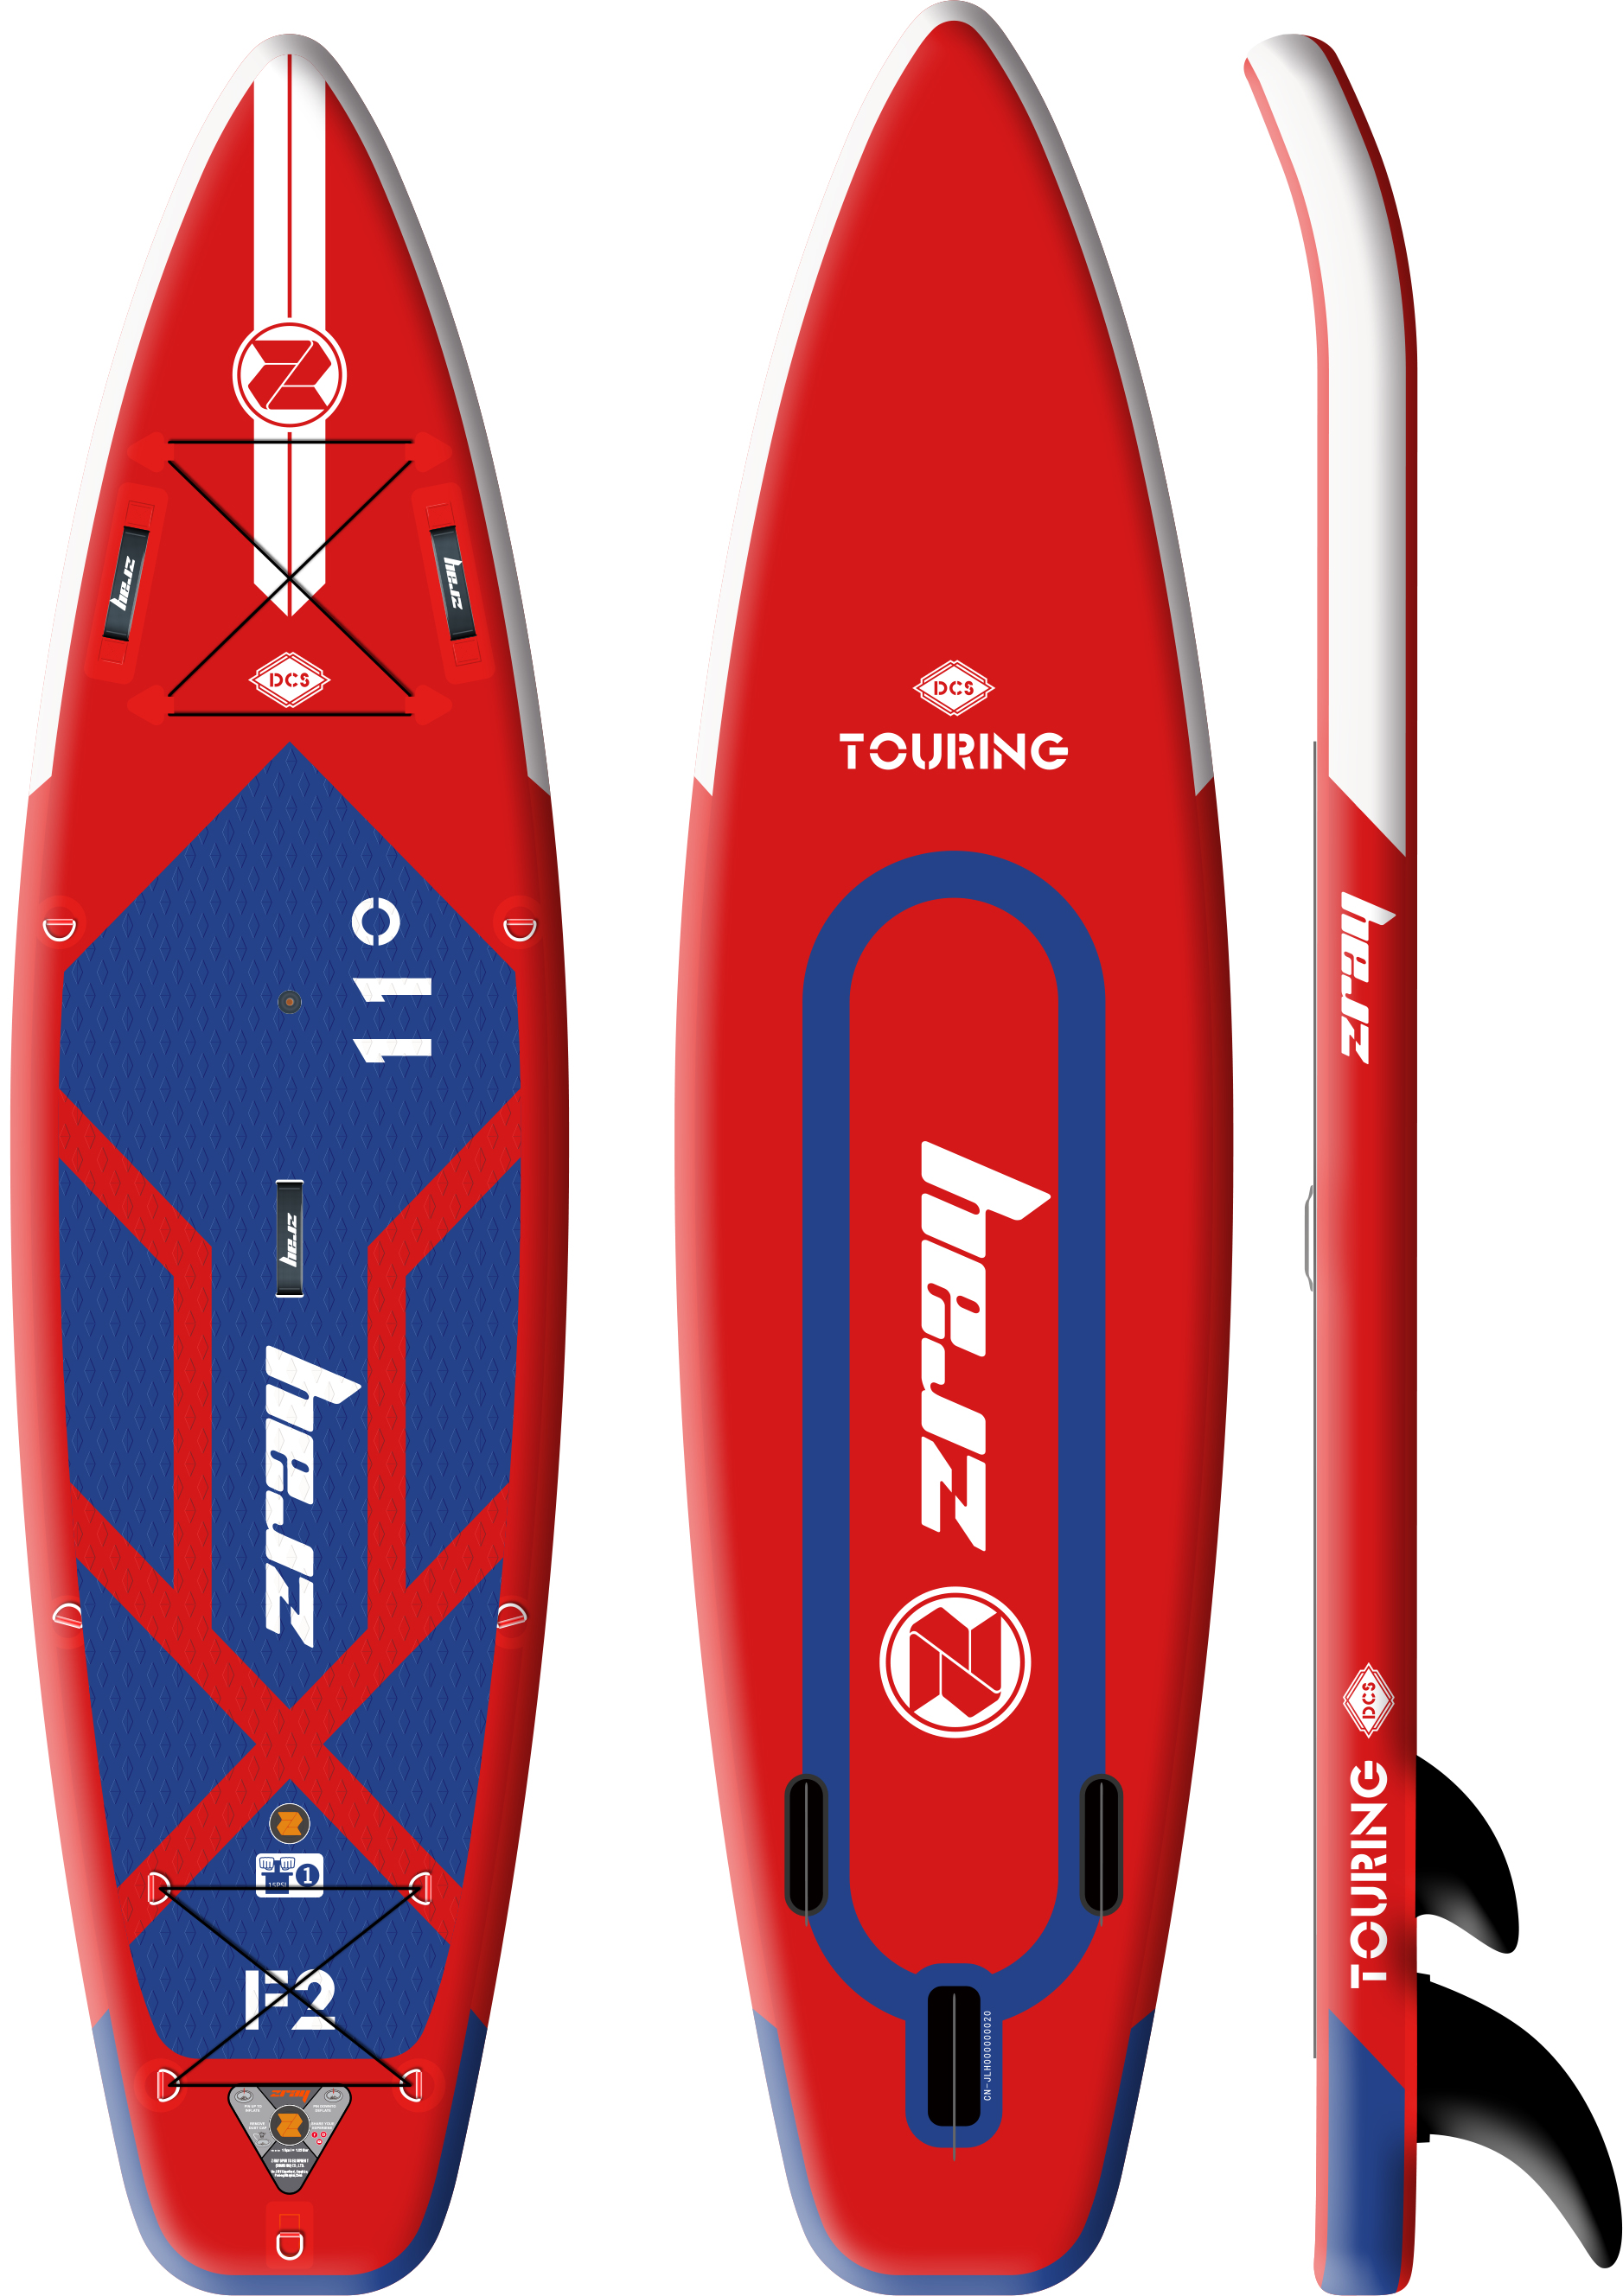 ZRAY Fury Epic 12 Inflatable SUP - Sunstate WaterSports